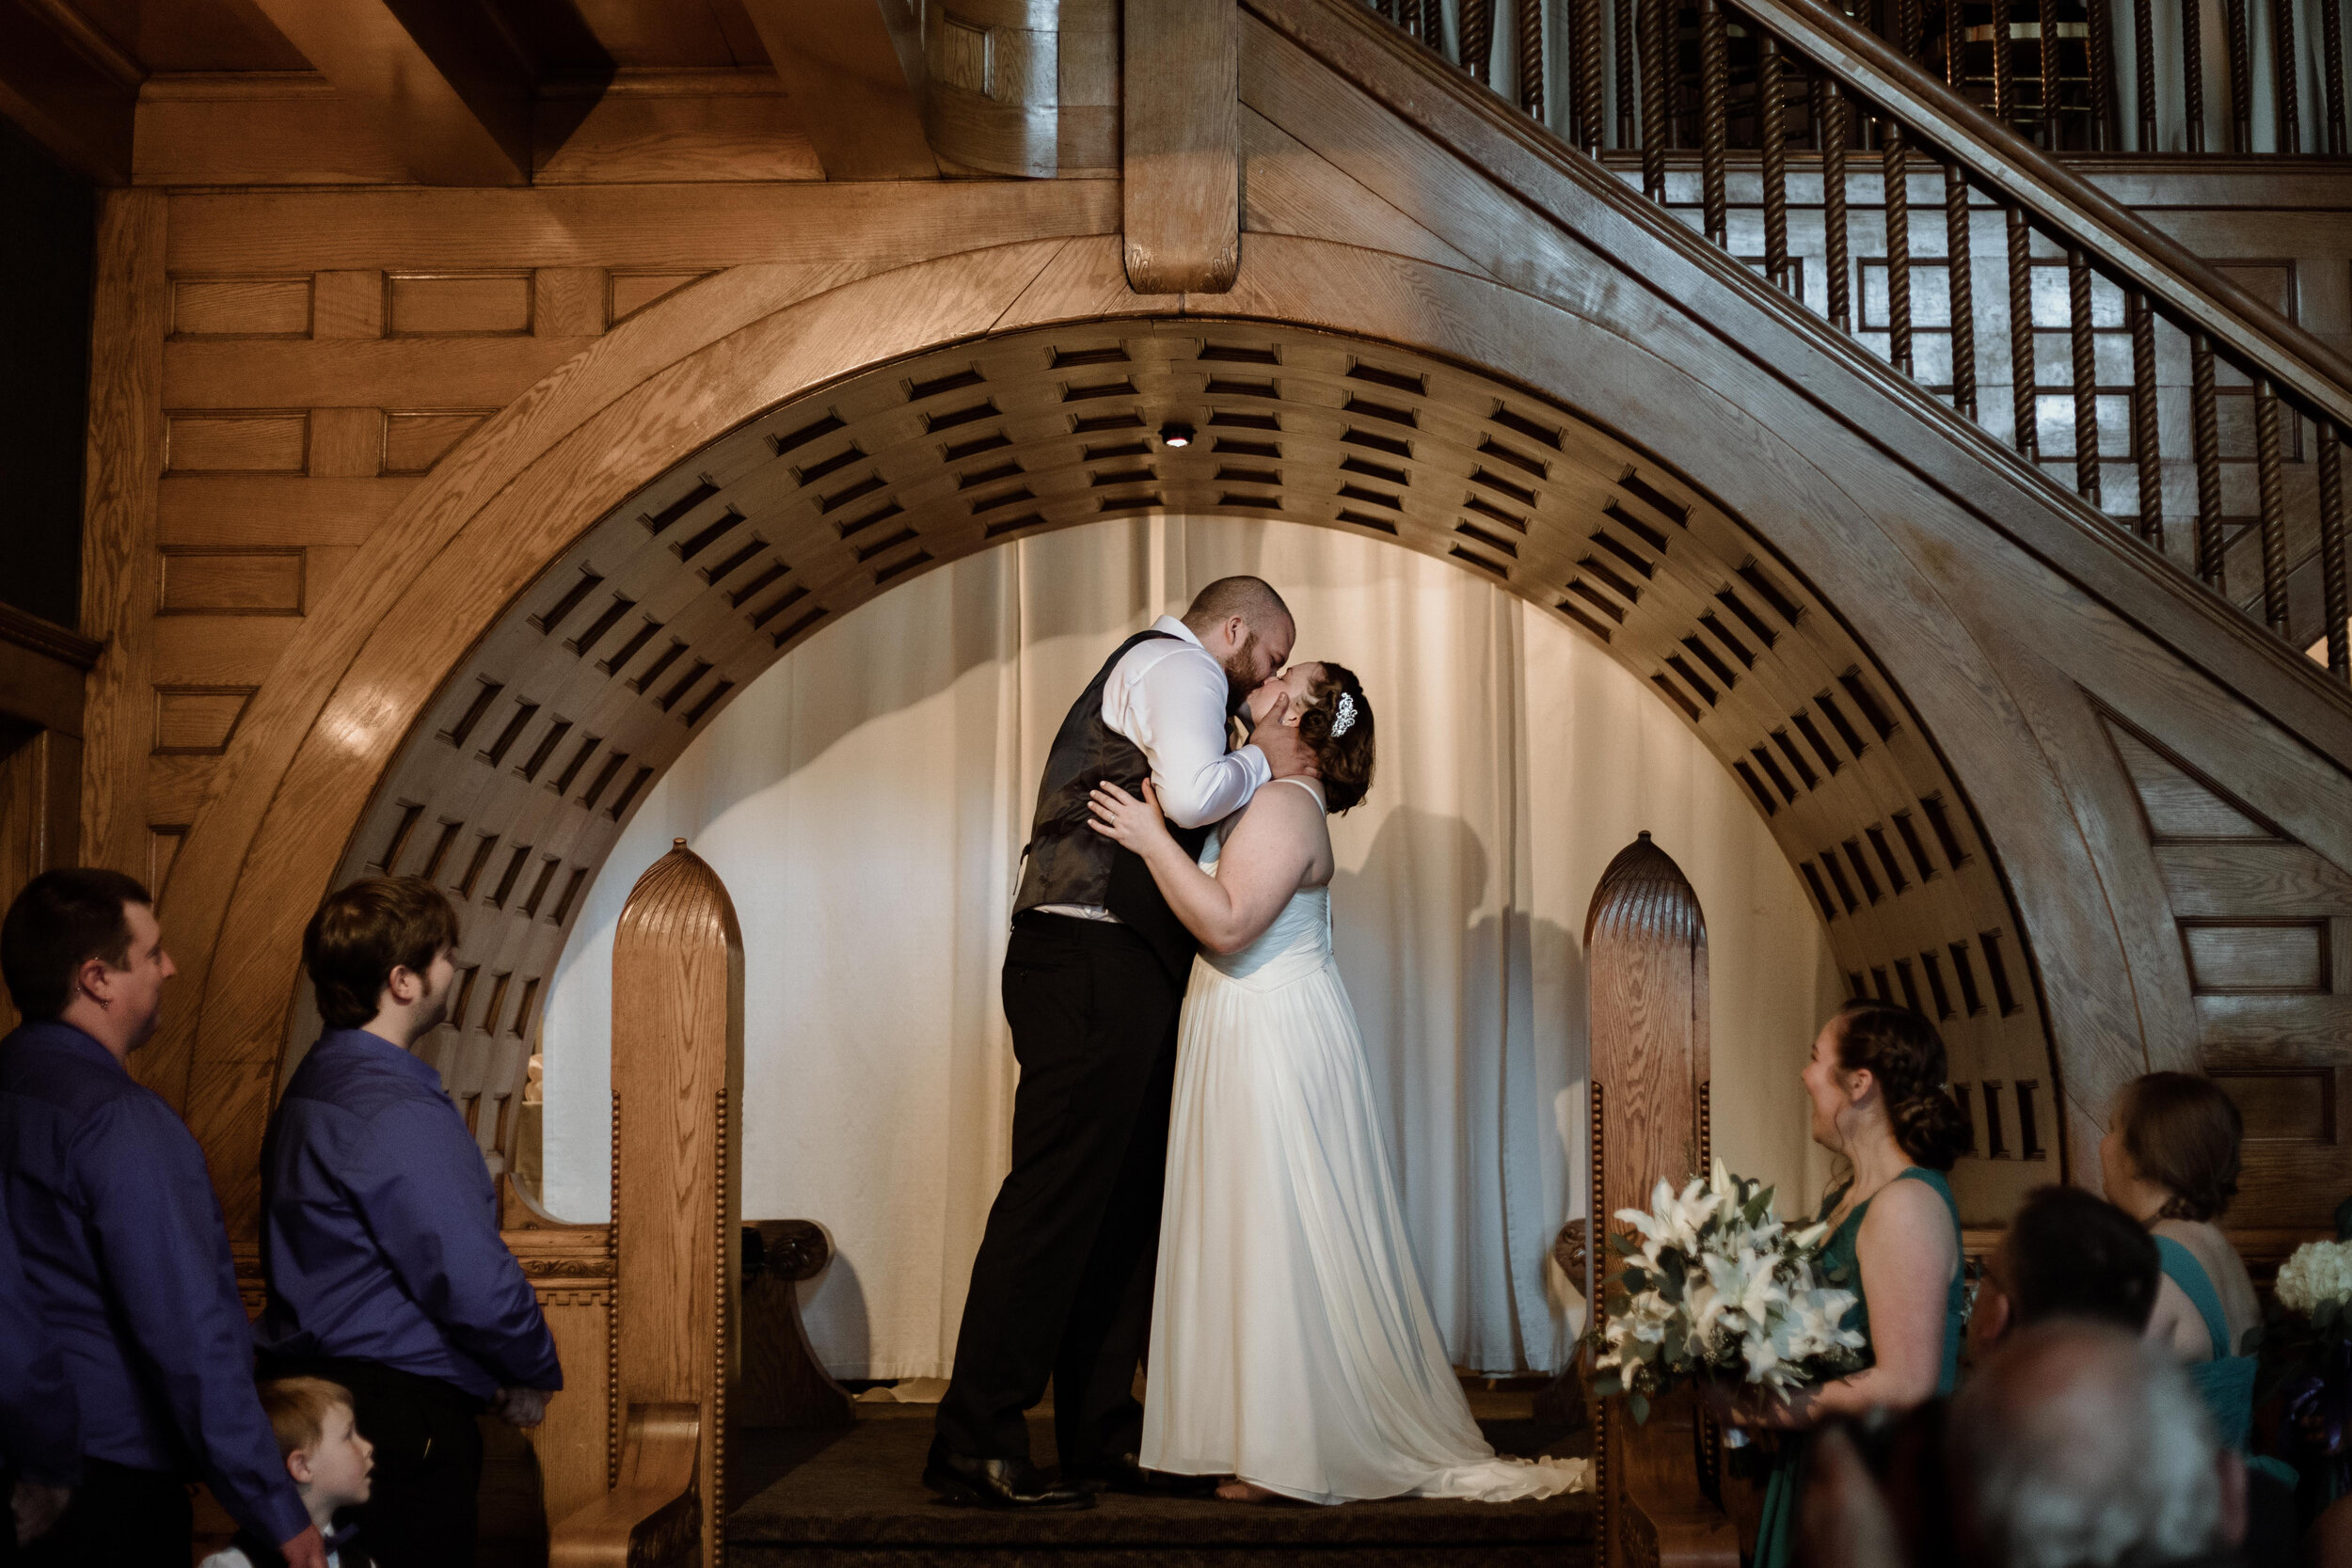 First kiss in wedding ceremony arch at Glover Mansion in Spokane, WA